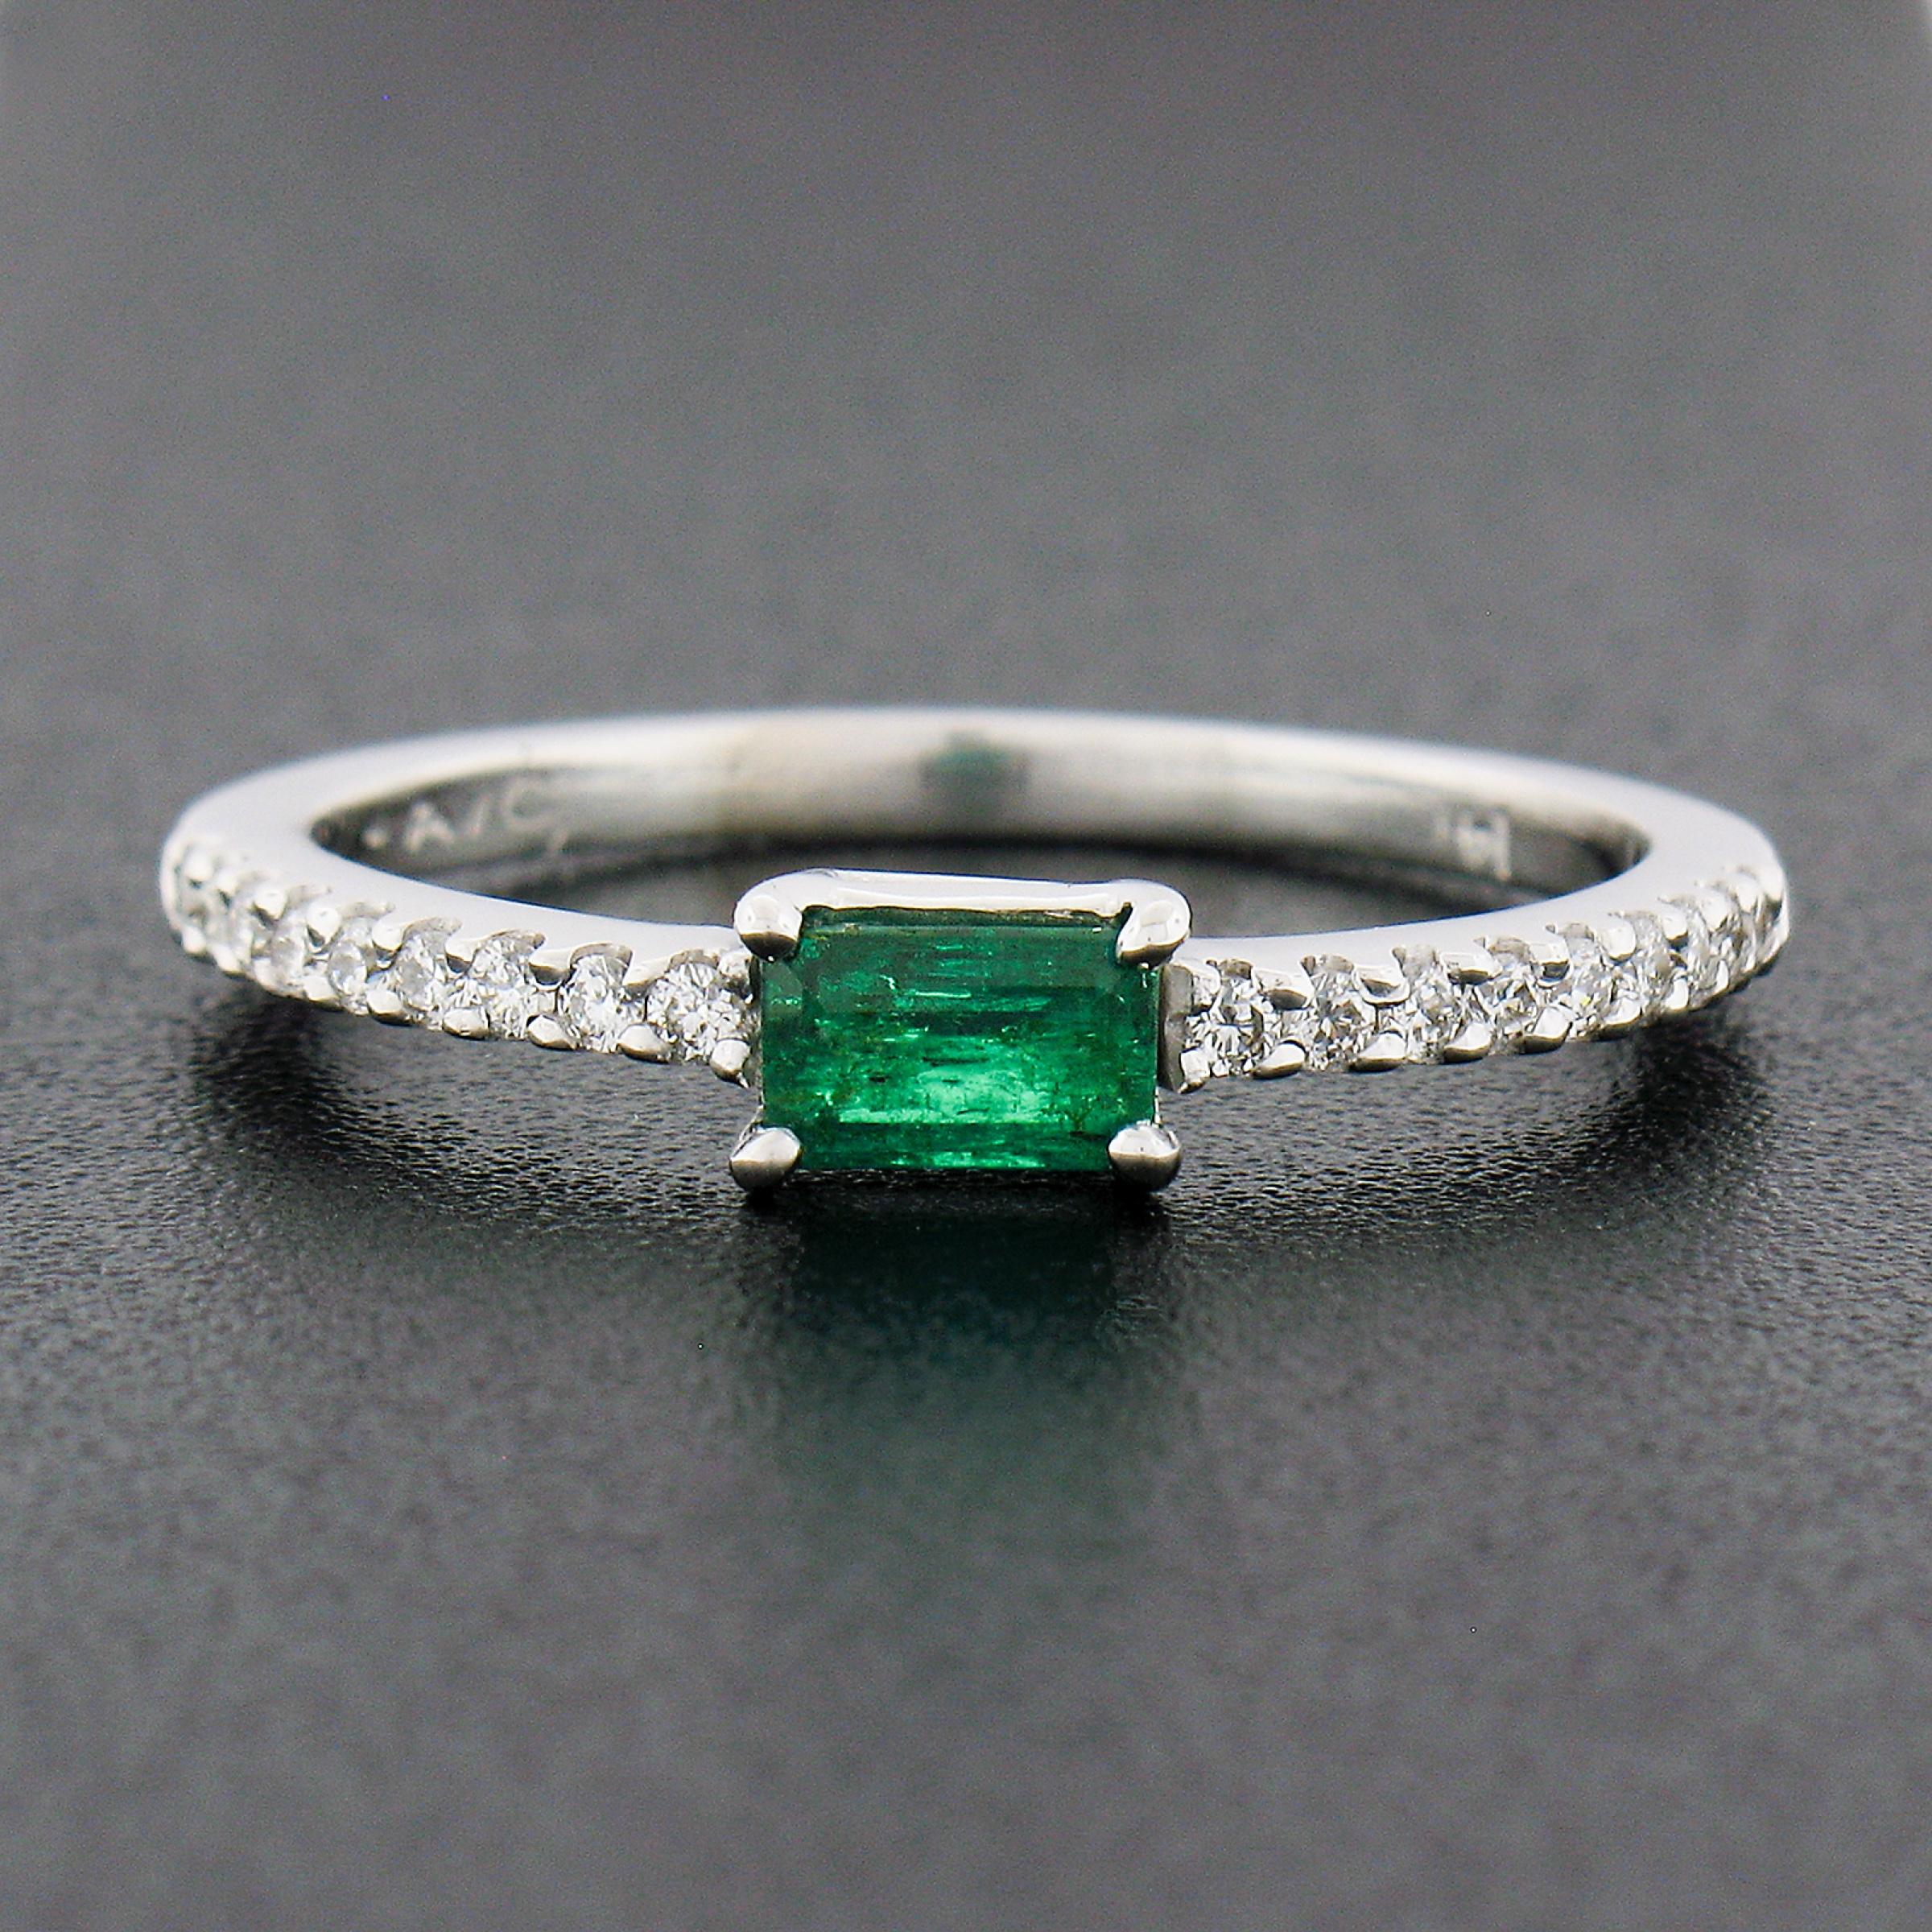 Emerald Cut 14k White Gold 0.44ctw Emerald & Diamond Sideways Engagement Stackable Band Ring